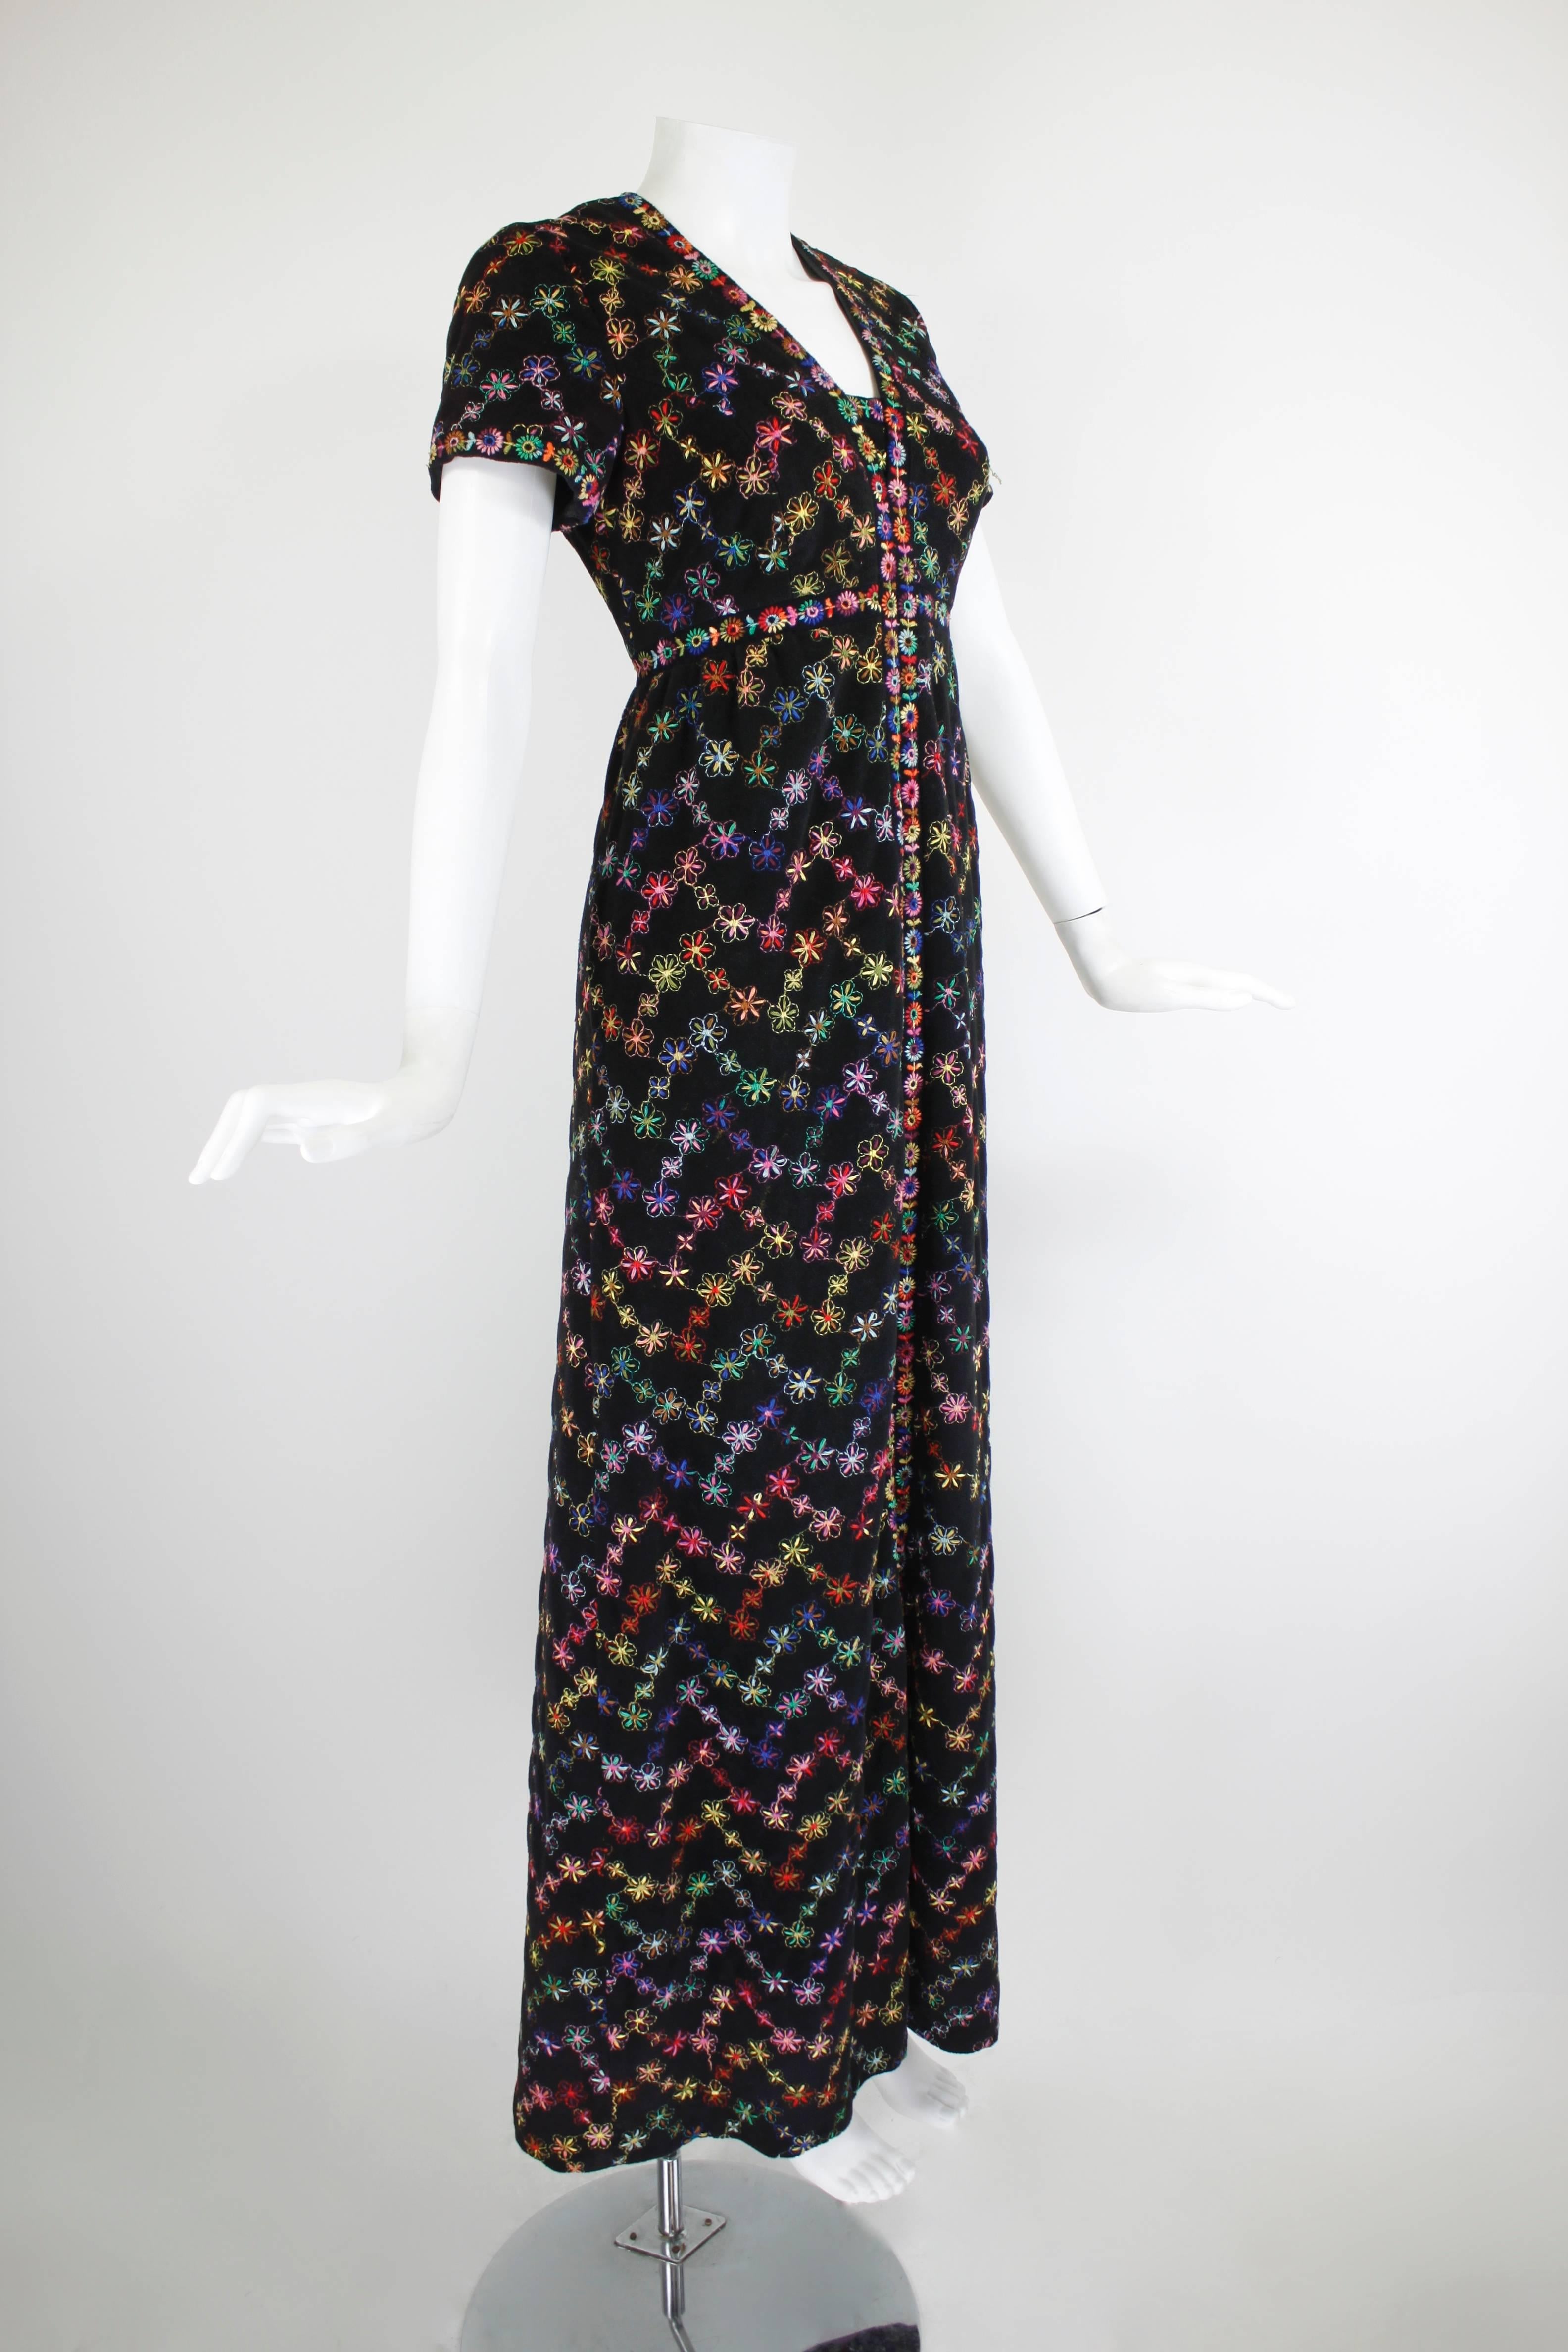 This fabulous maxi dress from the 70s, attributed to Sant' Angelo, is covered in beautiful rainbow spectrum floral embroidery. The column gown features and empire waist and cap sleeves. Attributed to Sant' Angelo.

-Fully lined
-Zips in